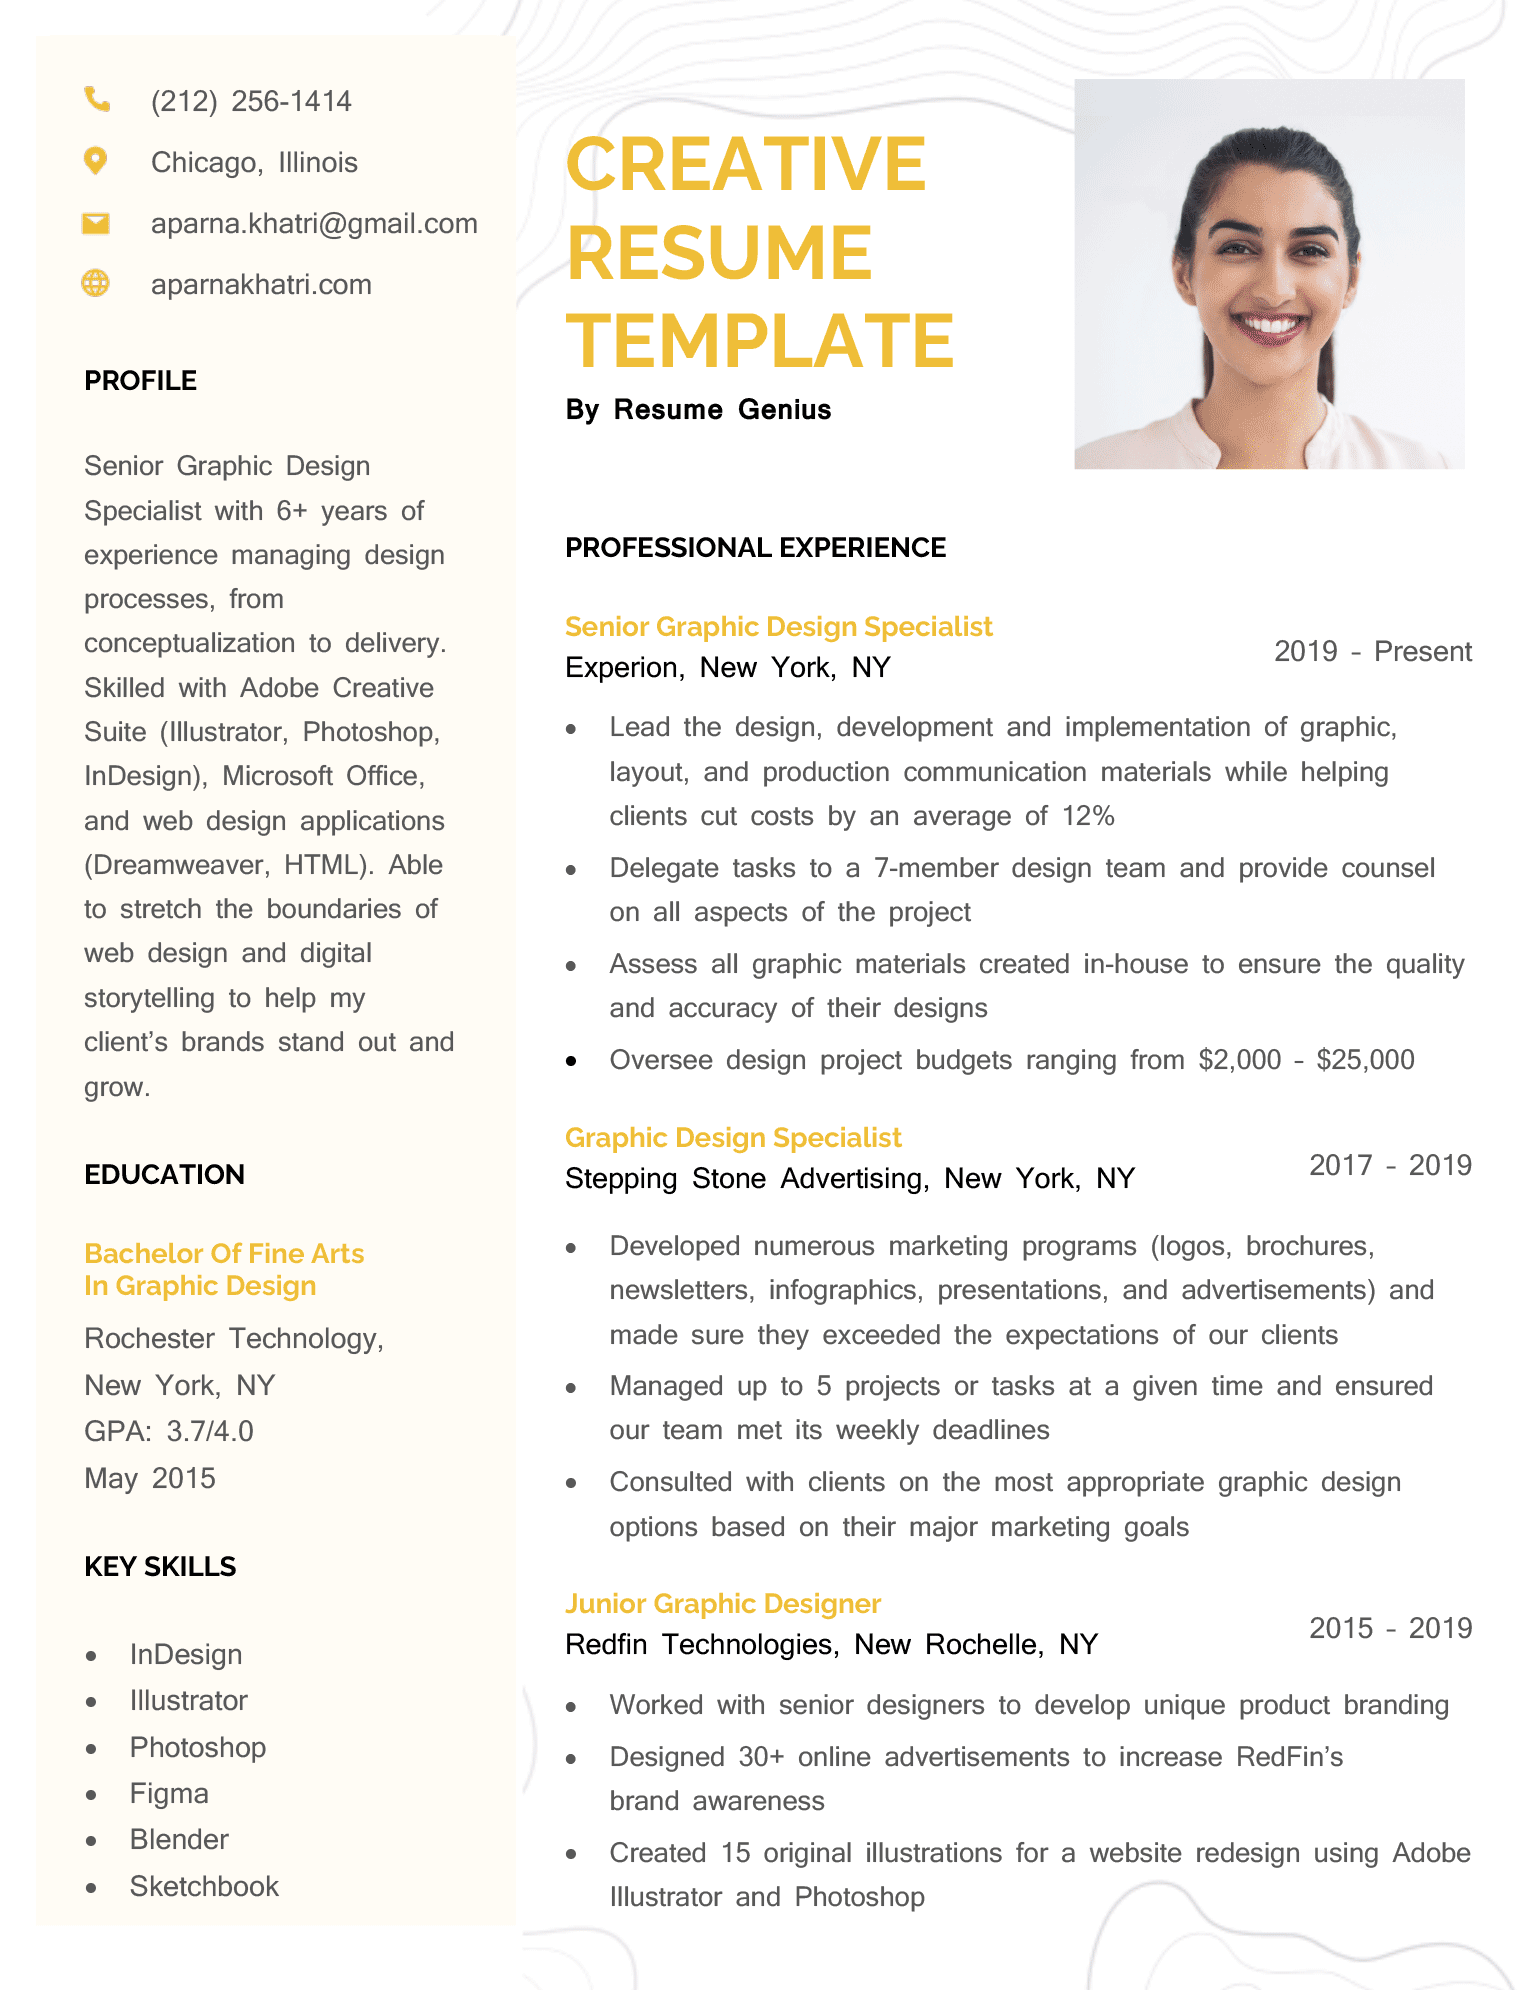 Creative resume template with space for a professional headshot and a unique background design.